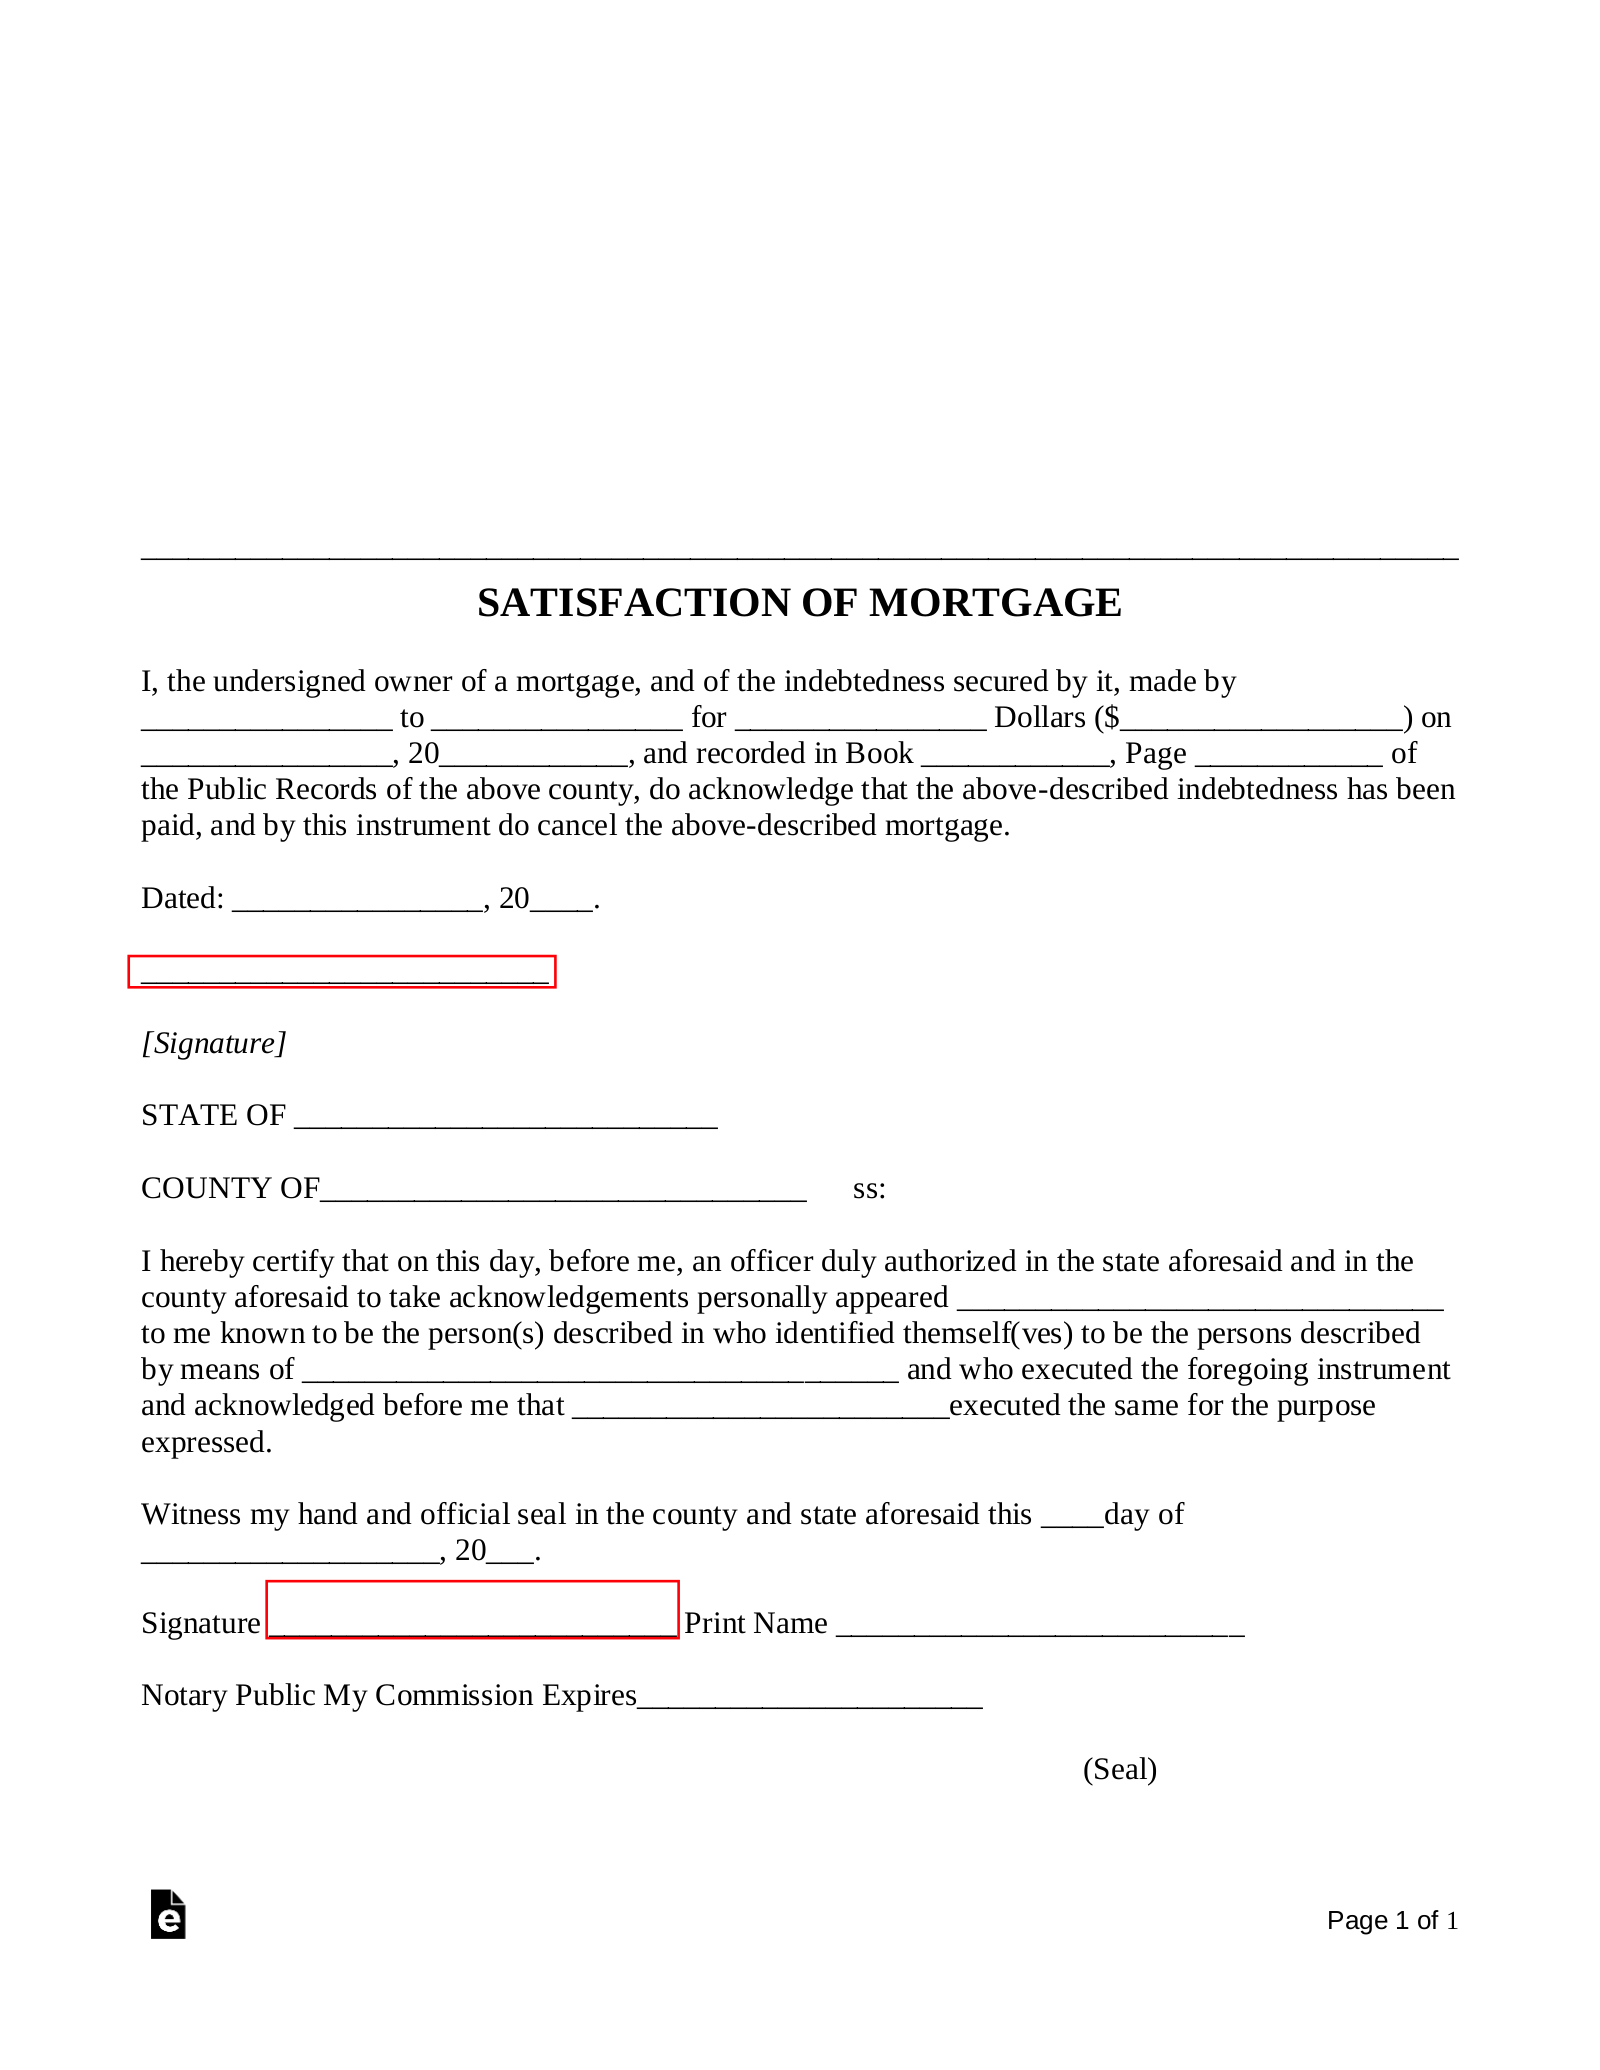 Free Mortgage Lien Release (Satisfaction of Mortgage) Form PDF Word